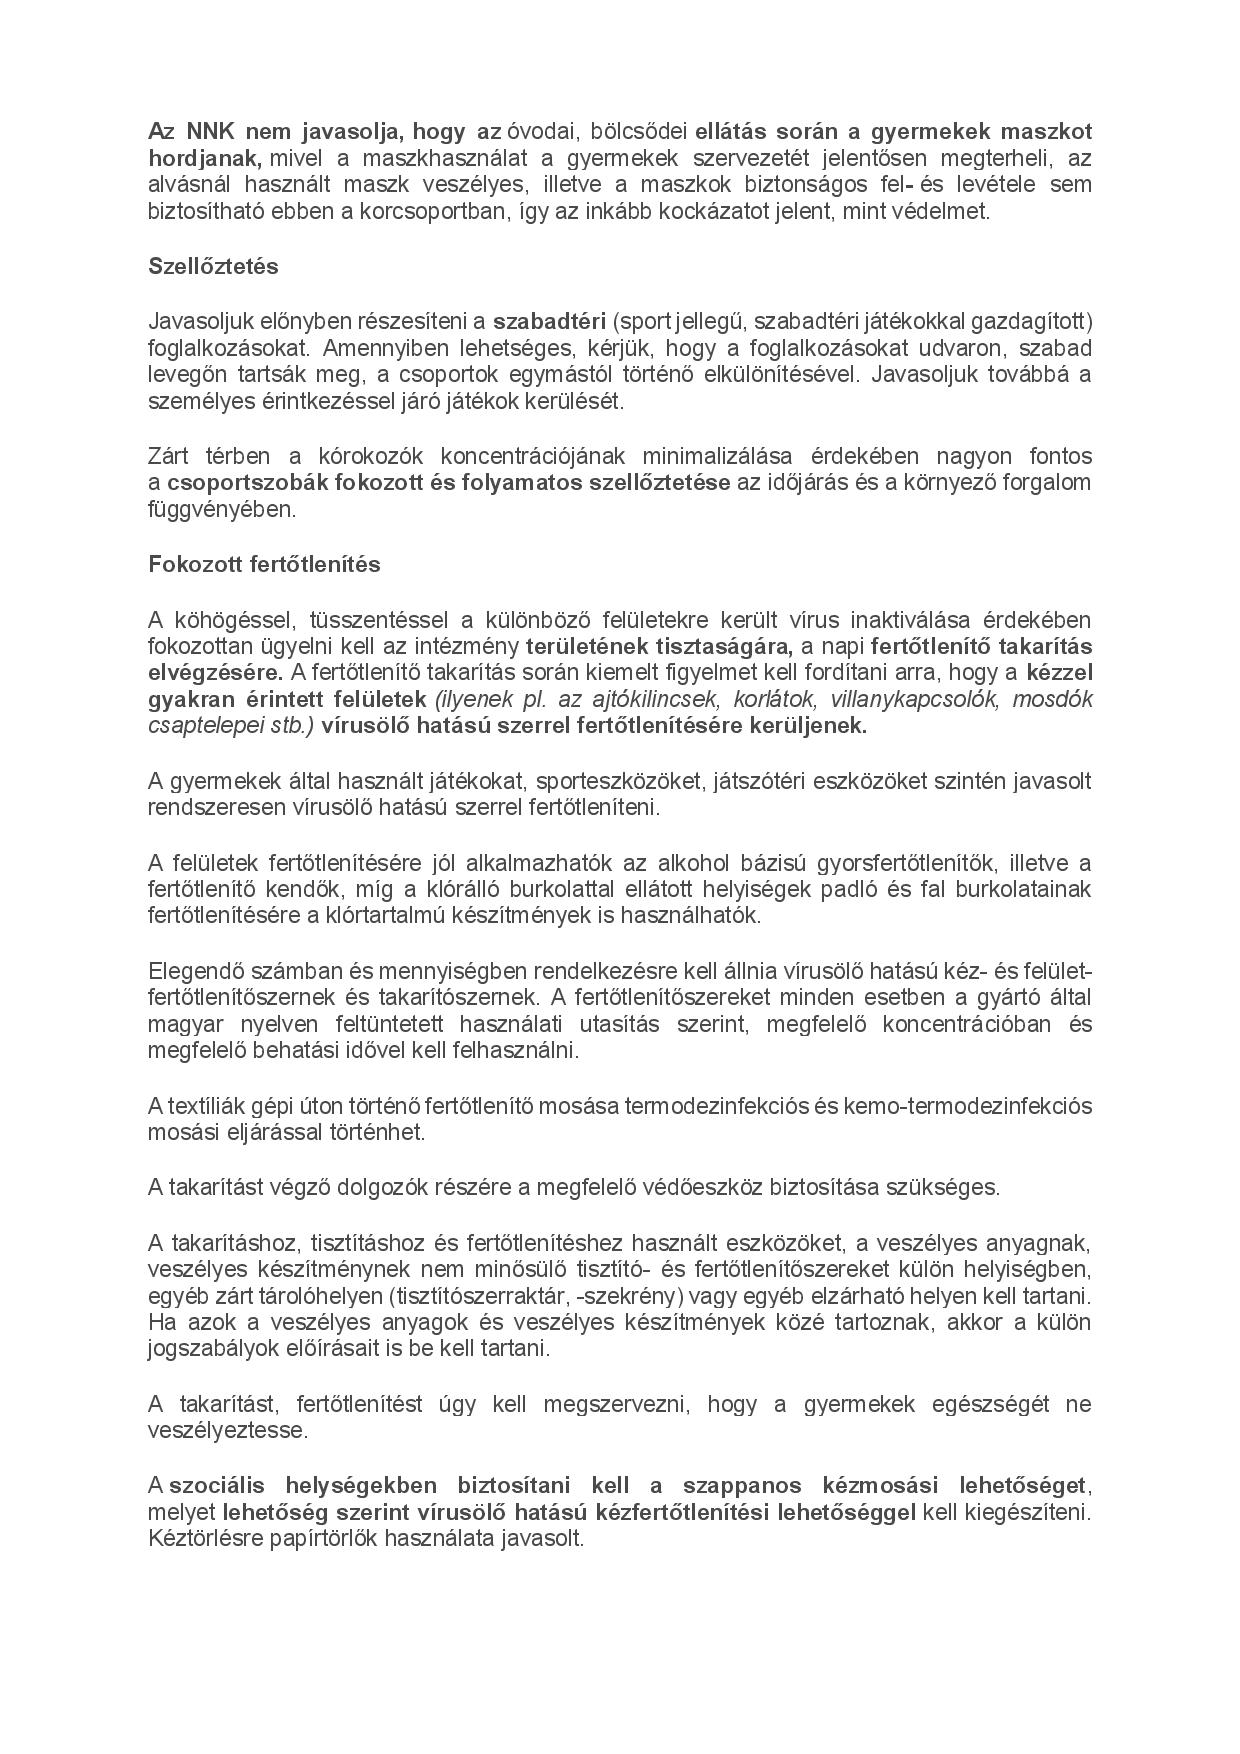 Document-page-002 (1)